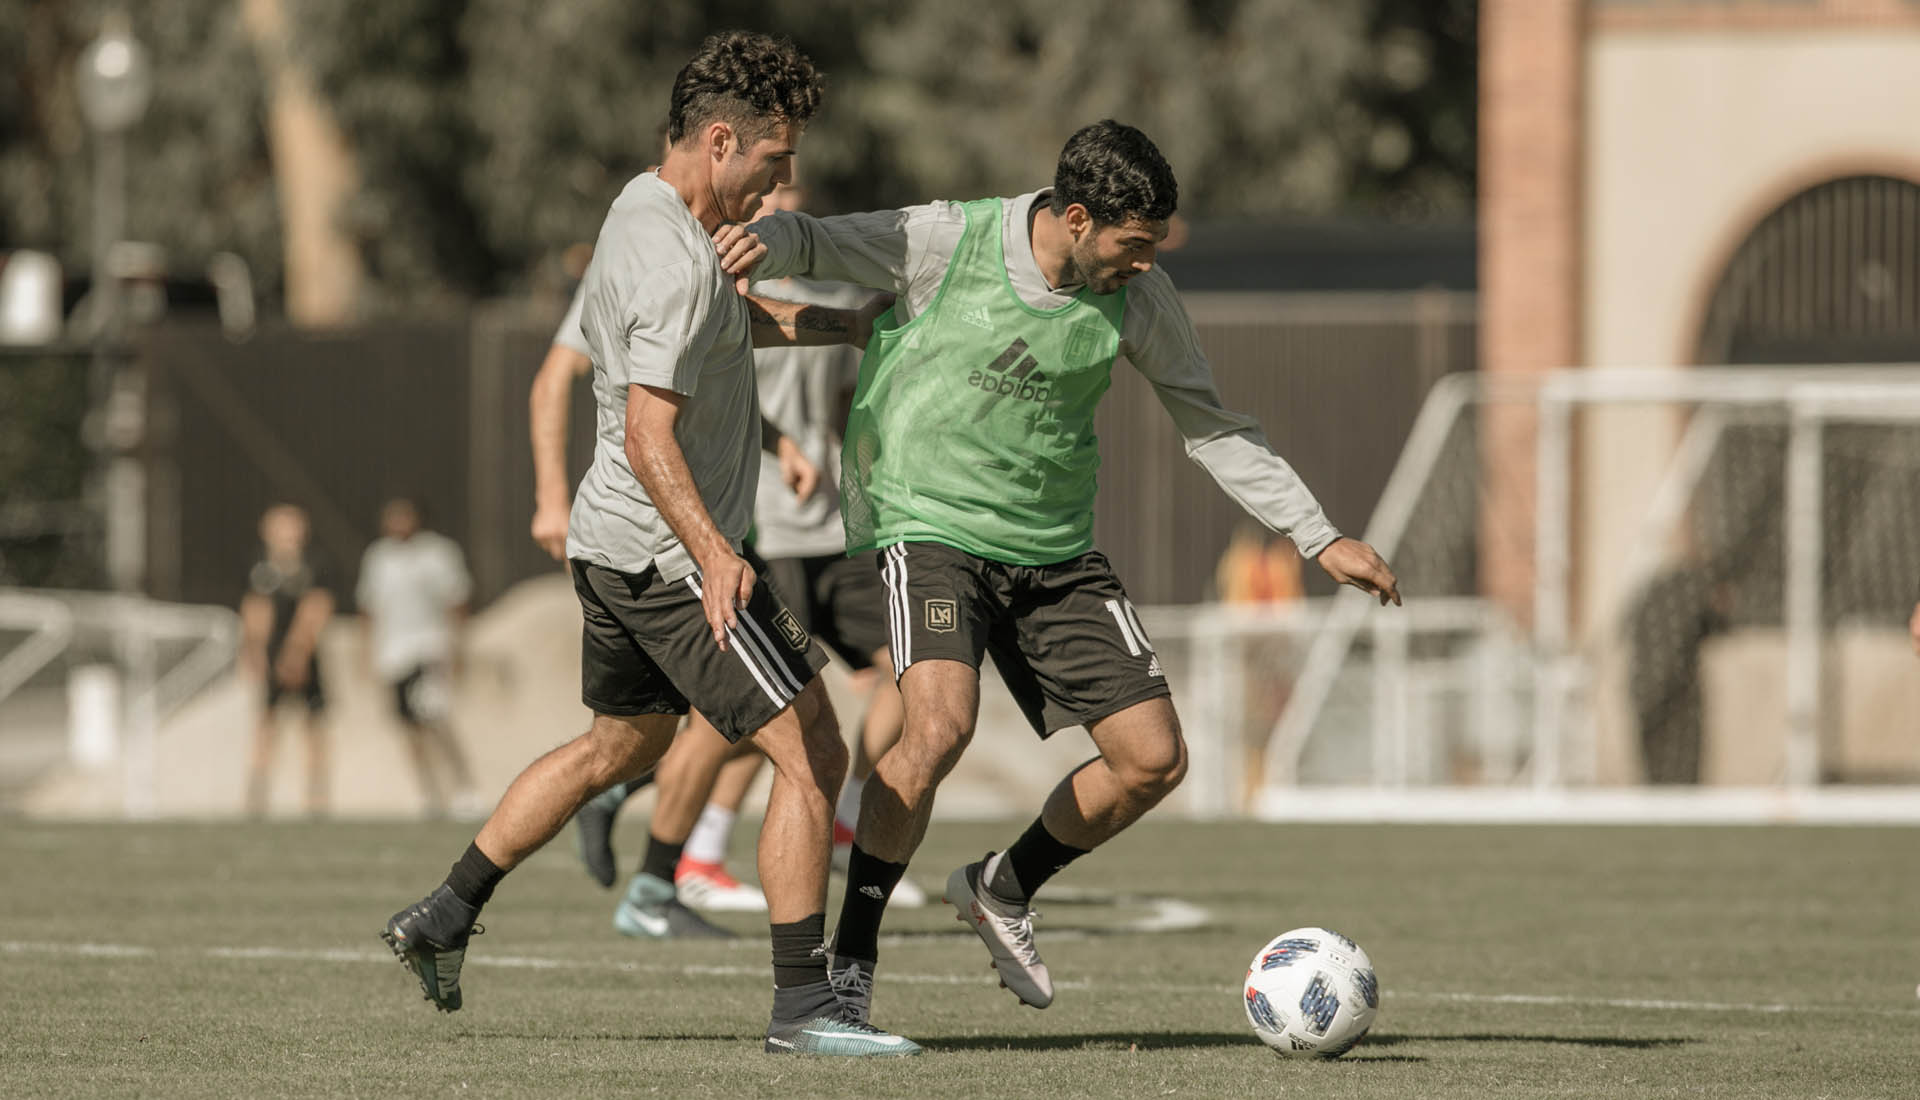 LAFC seeks to create and improve community through soccer – Daily Breeze